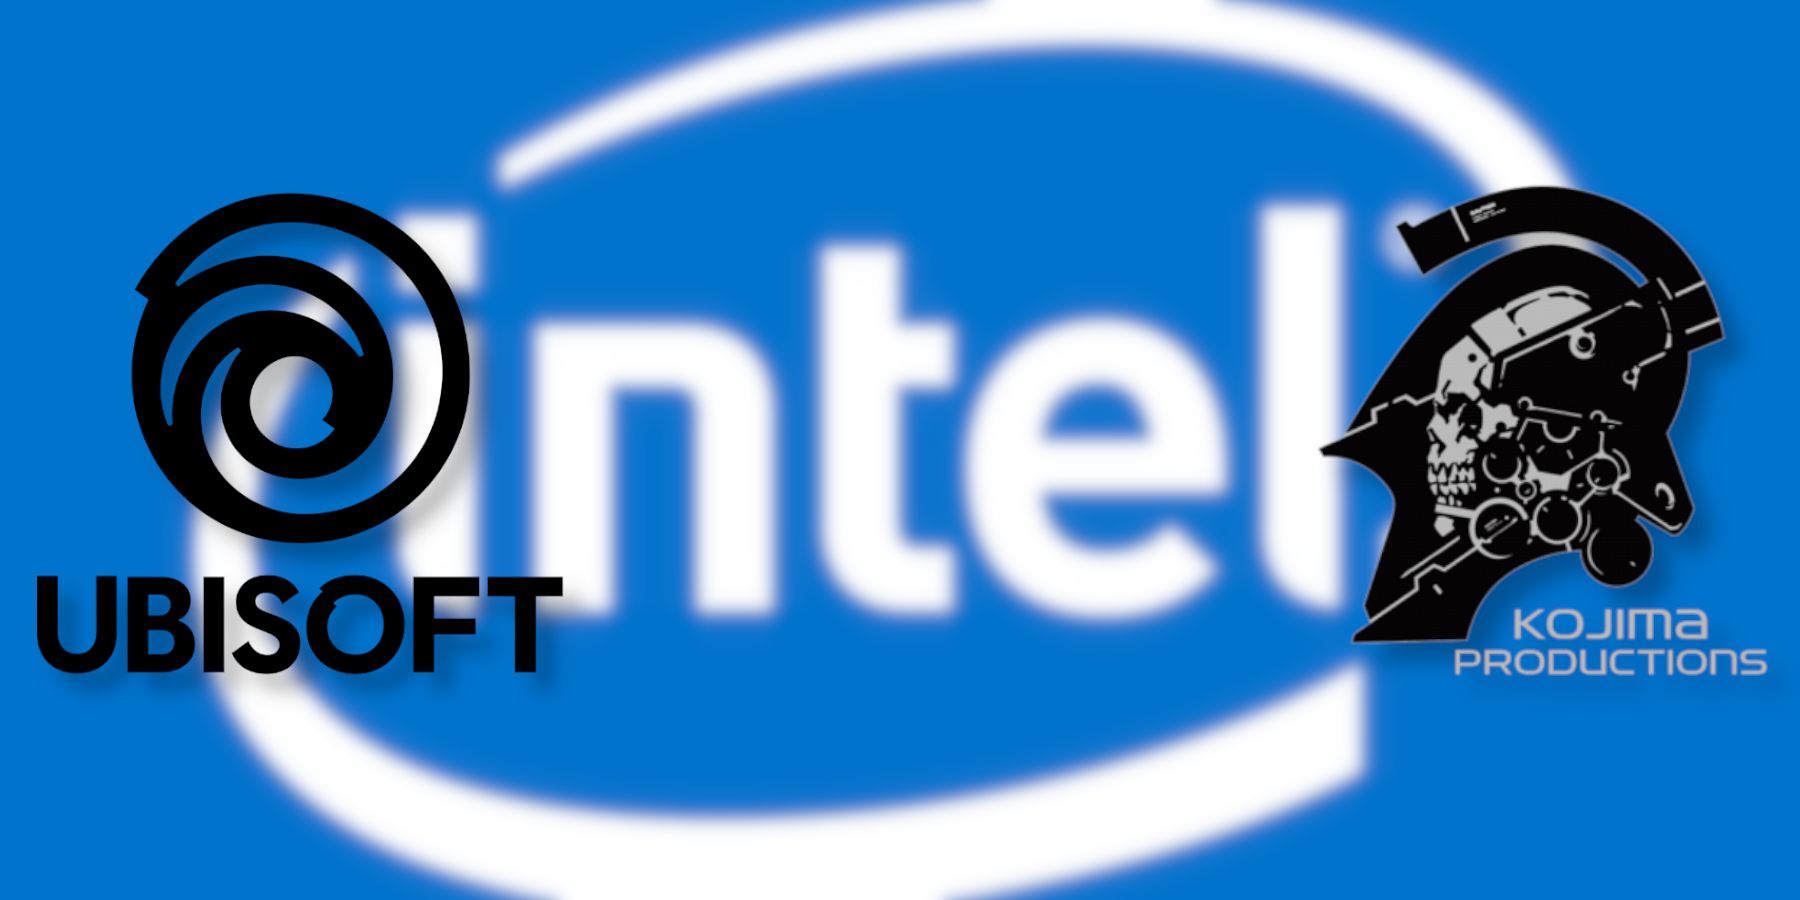 A blurry Intel logo in the background with the Ubisoft and Kojima Productions logos in the foreground.